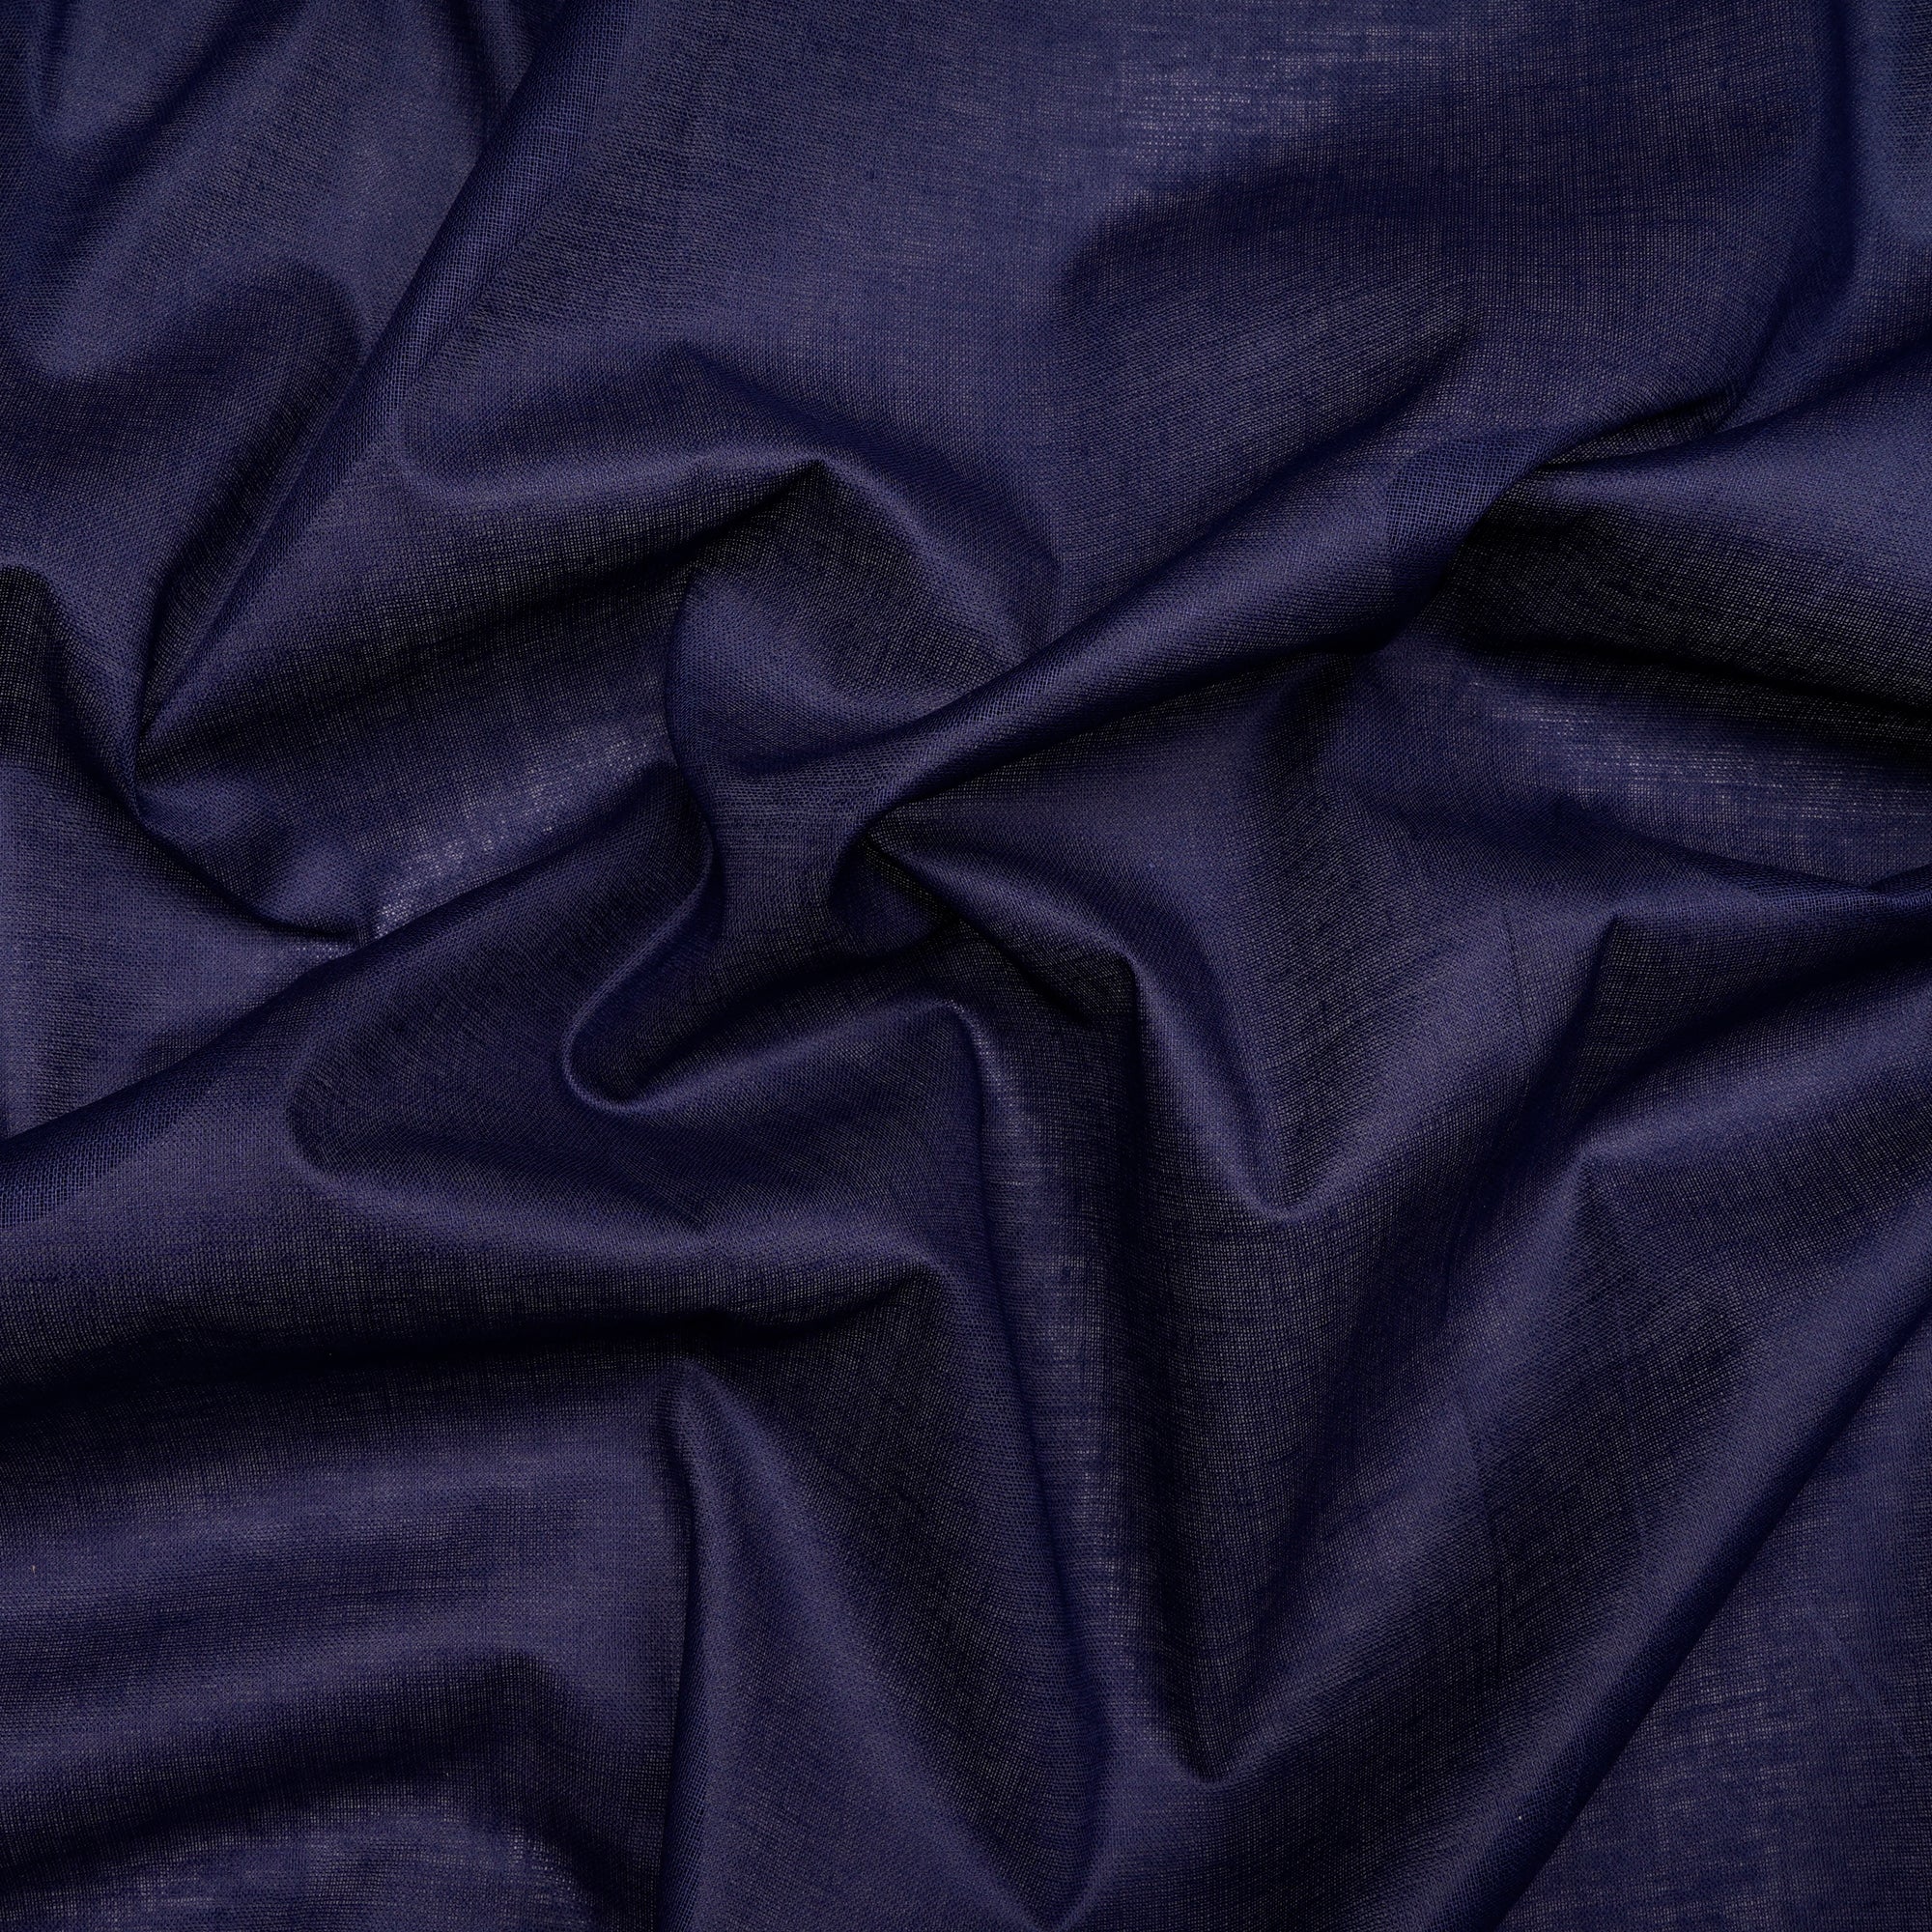 Voilet Mill Dyed Pure Cotton Lining Fabric